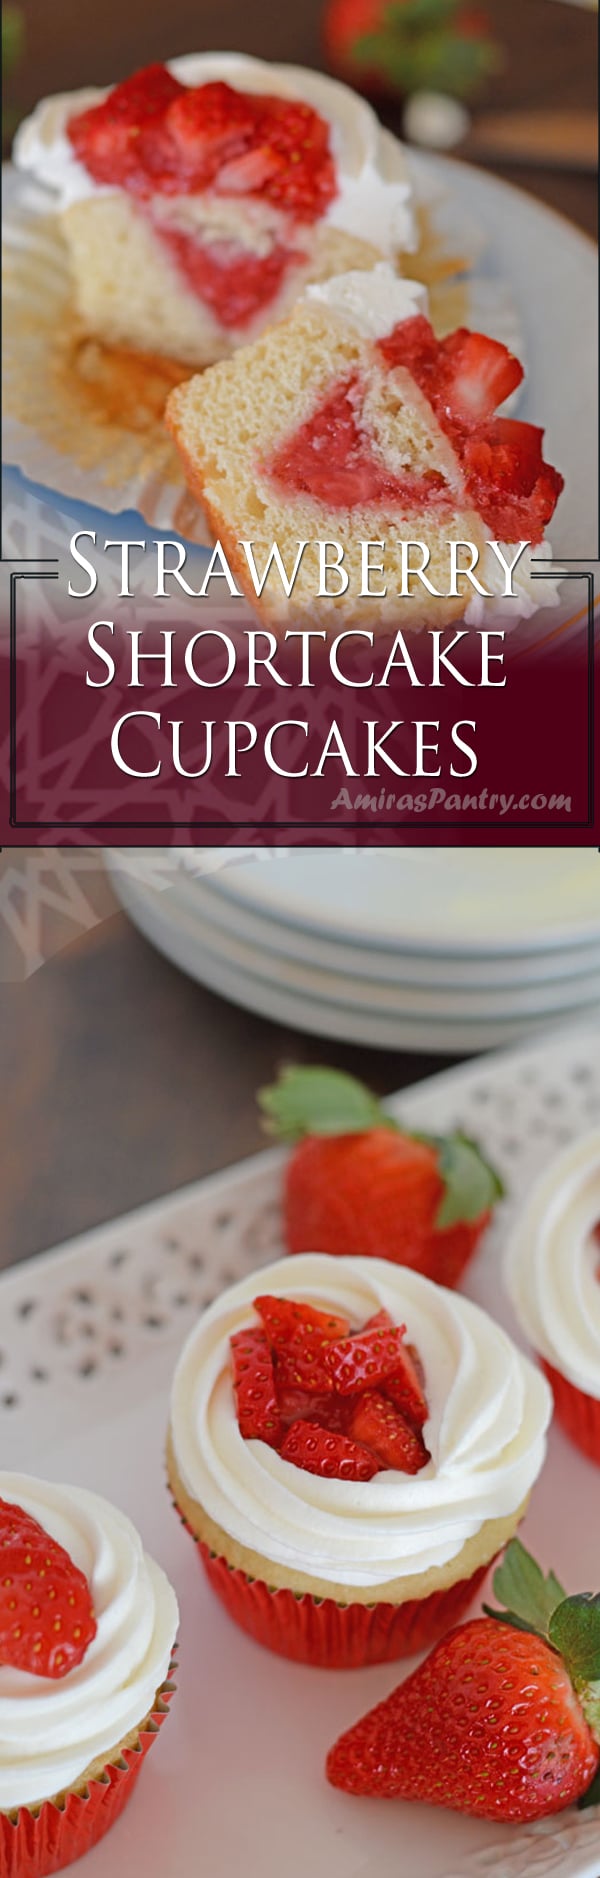 An infograph for Strawberry cupcakes recipe